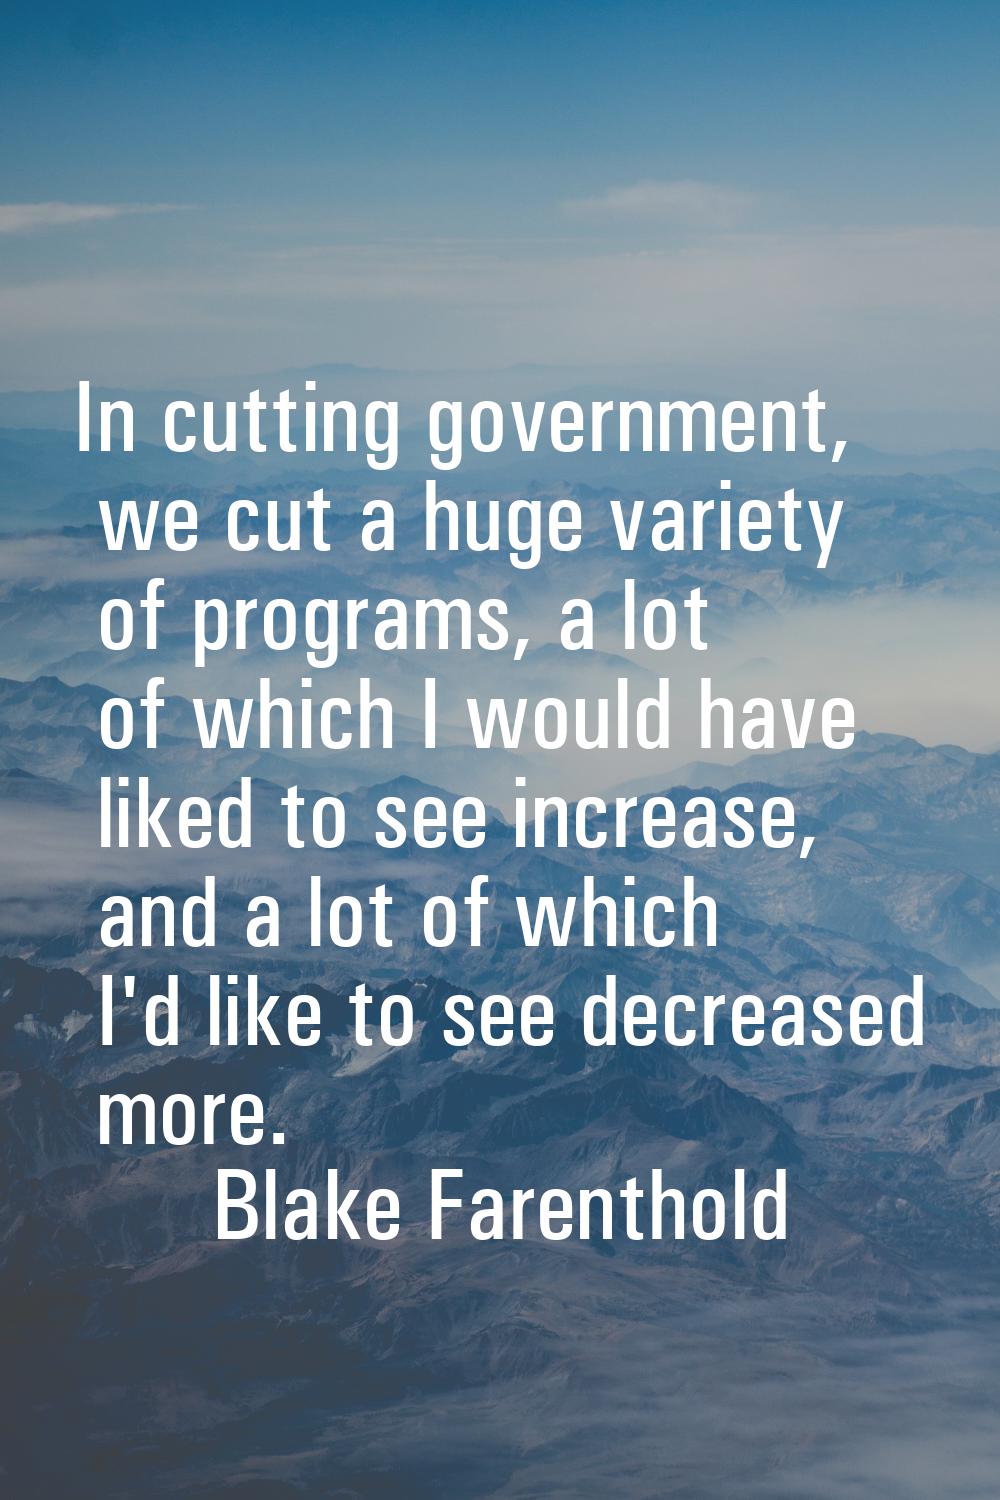 In cutting government, we cut a huge variety of programs, a lot of which I would have liked to see 